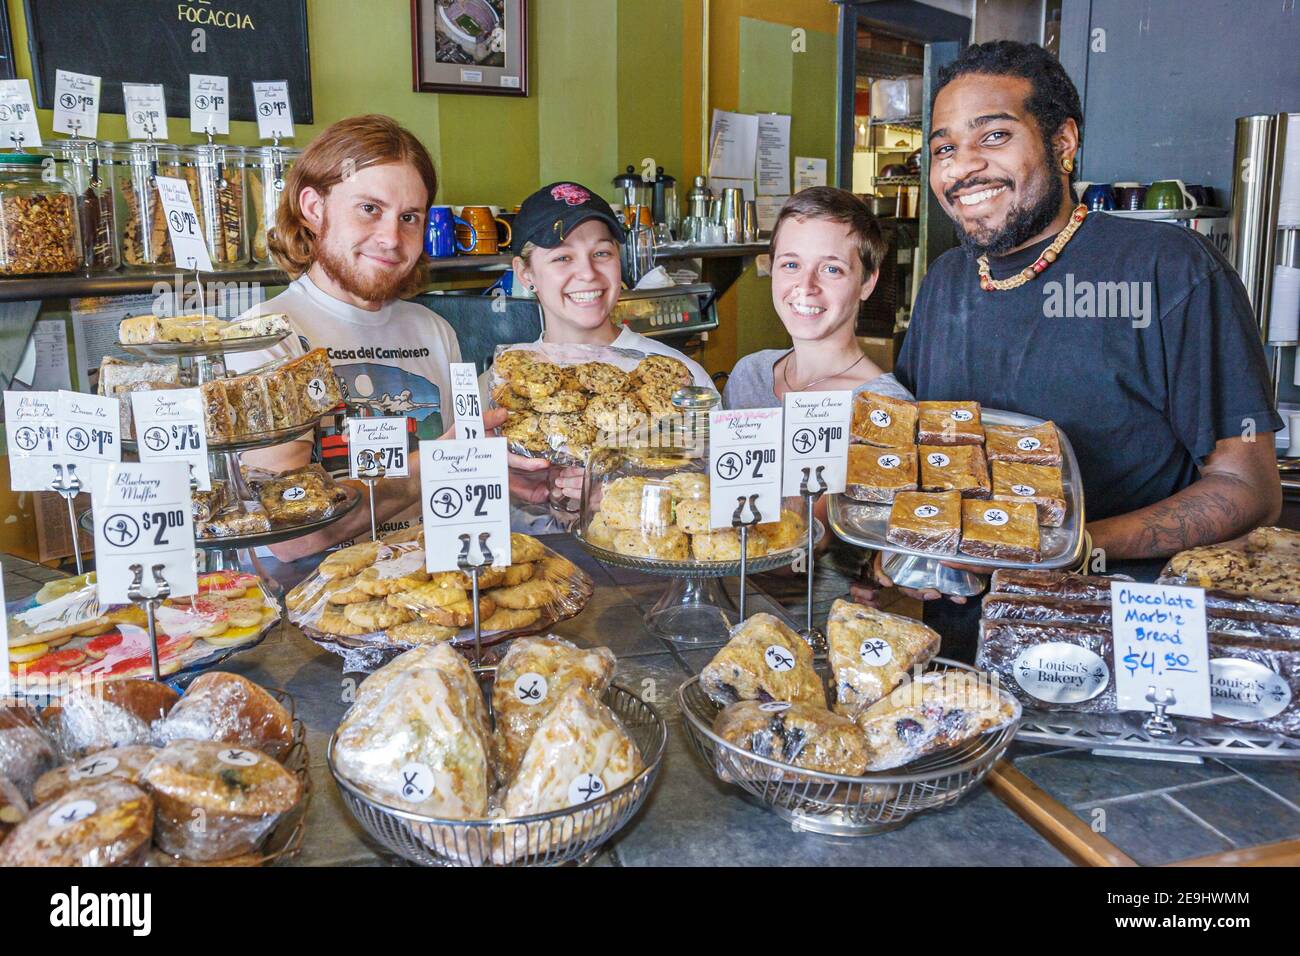 Alabama Montgomery Cloverdale Tomatinos Pizza & Bake Shop,employees Black man woman female counter display desserts baked goods, Stock Photo